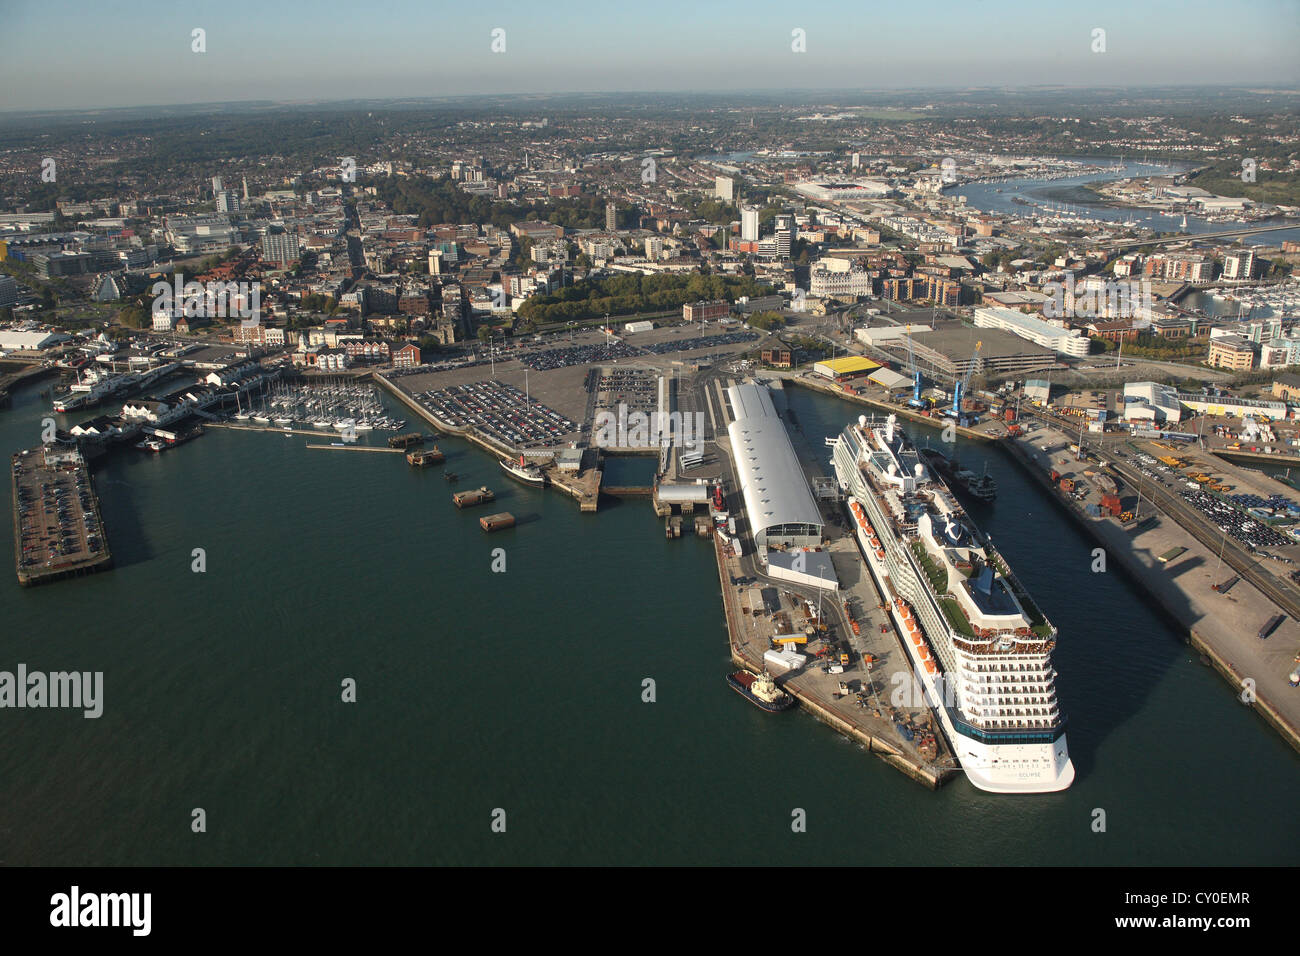 Celebrity Eclipse in the port of Southampton. Aerial photos. Stock Photo